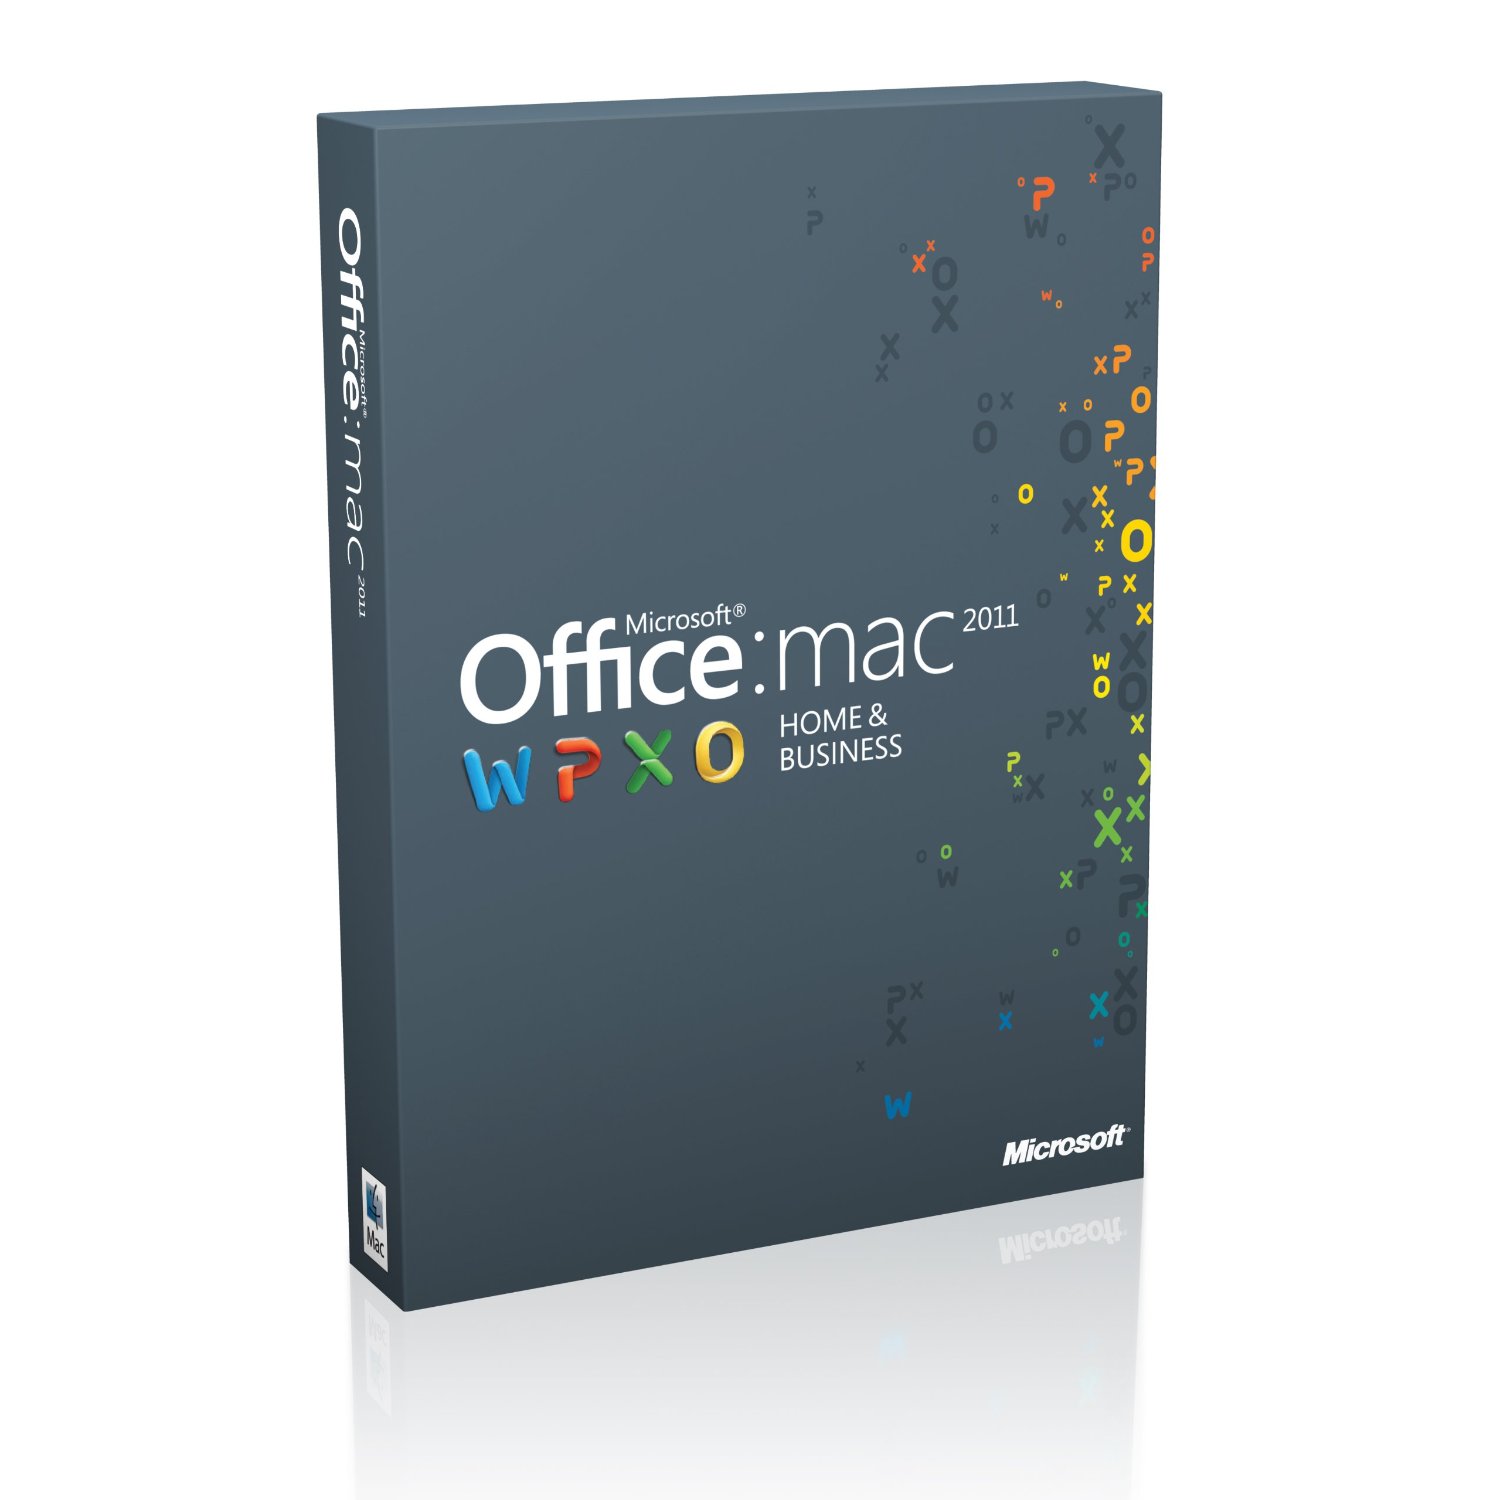 Cheapest way to buy microsoft office for mac